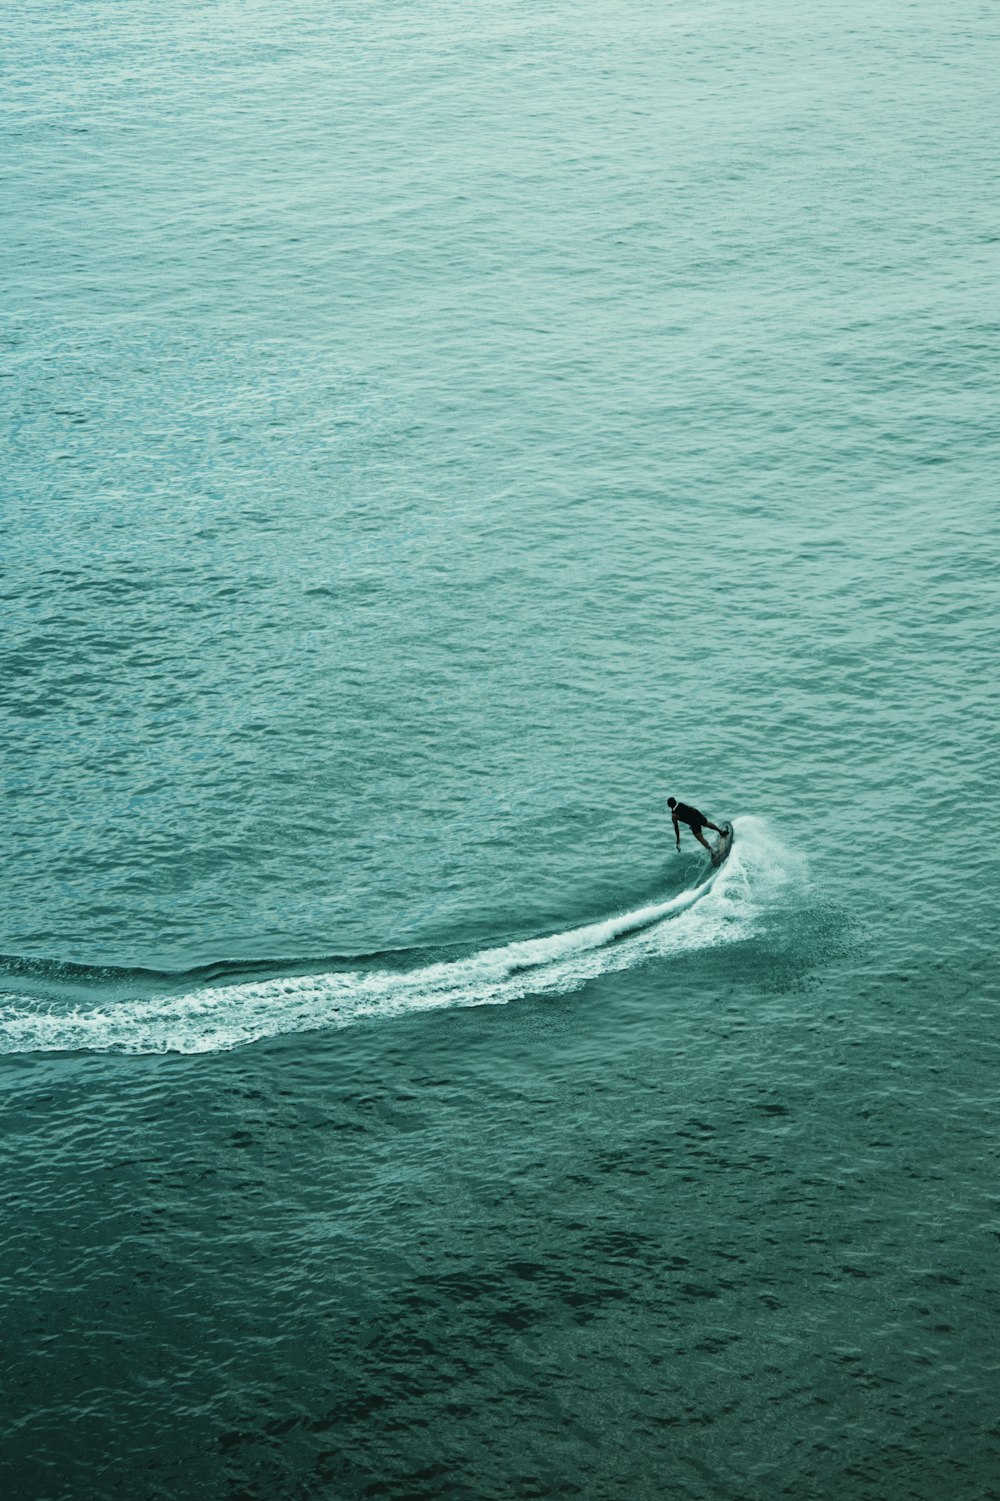 a person on a surfboard riding a wave in the ocean